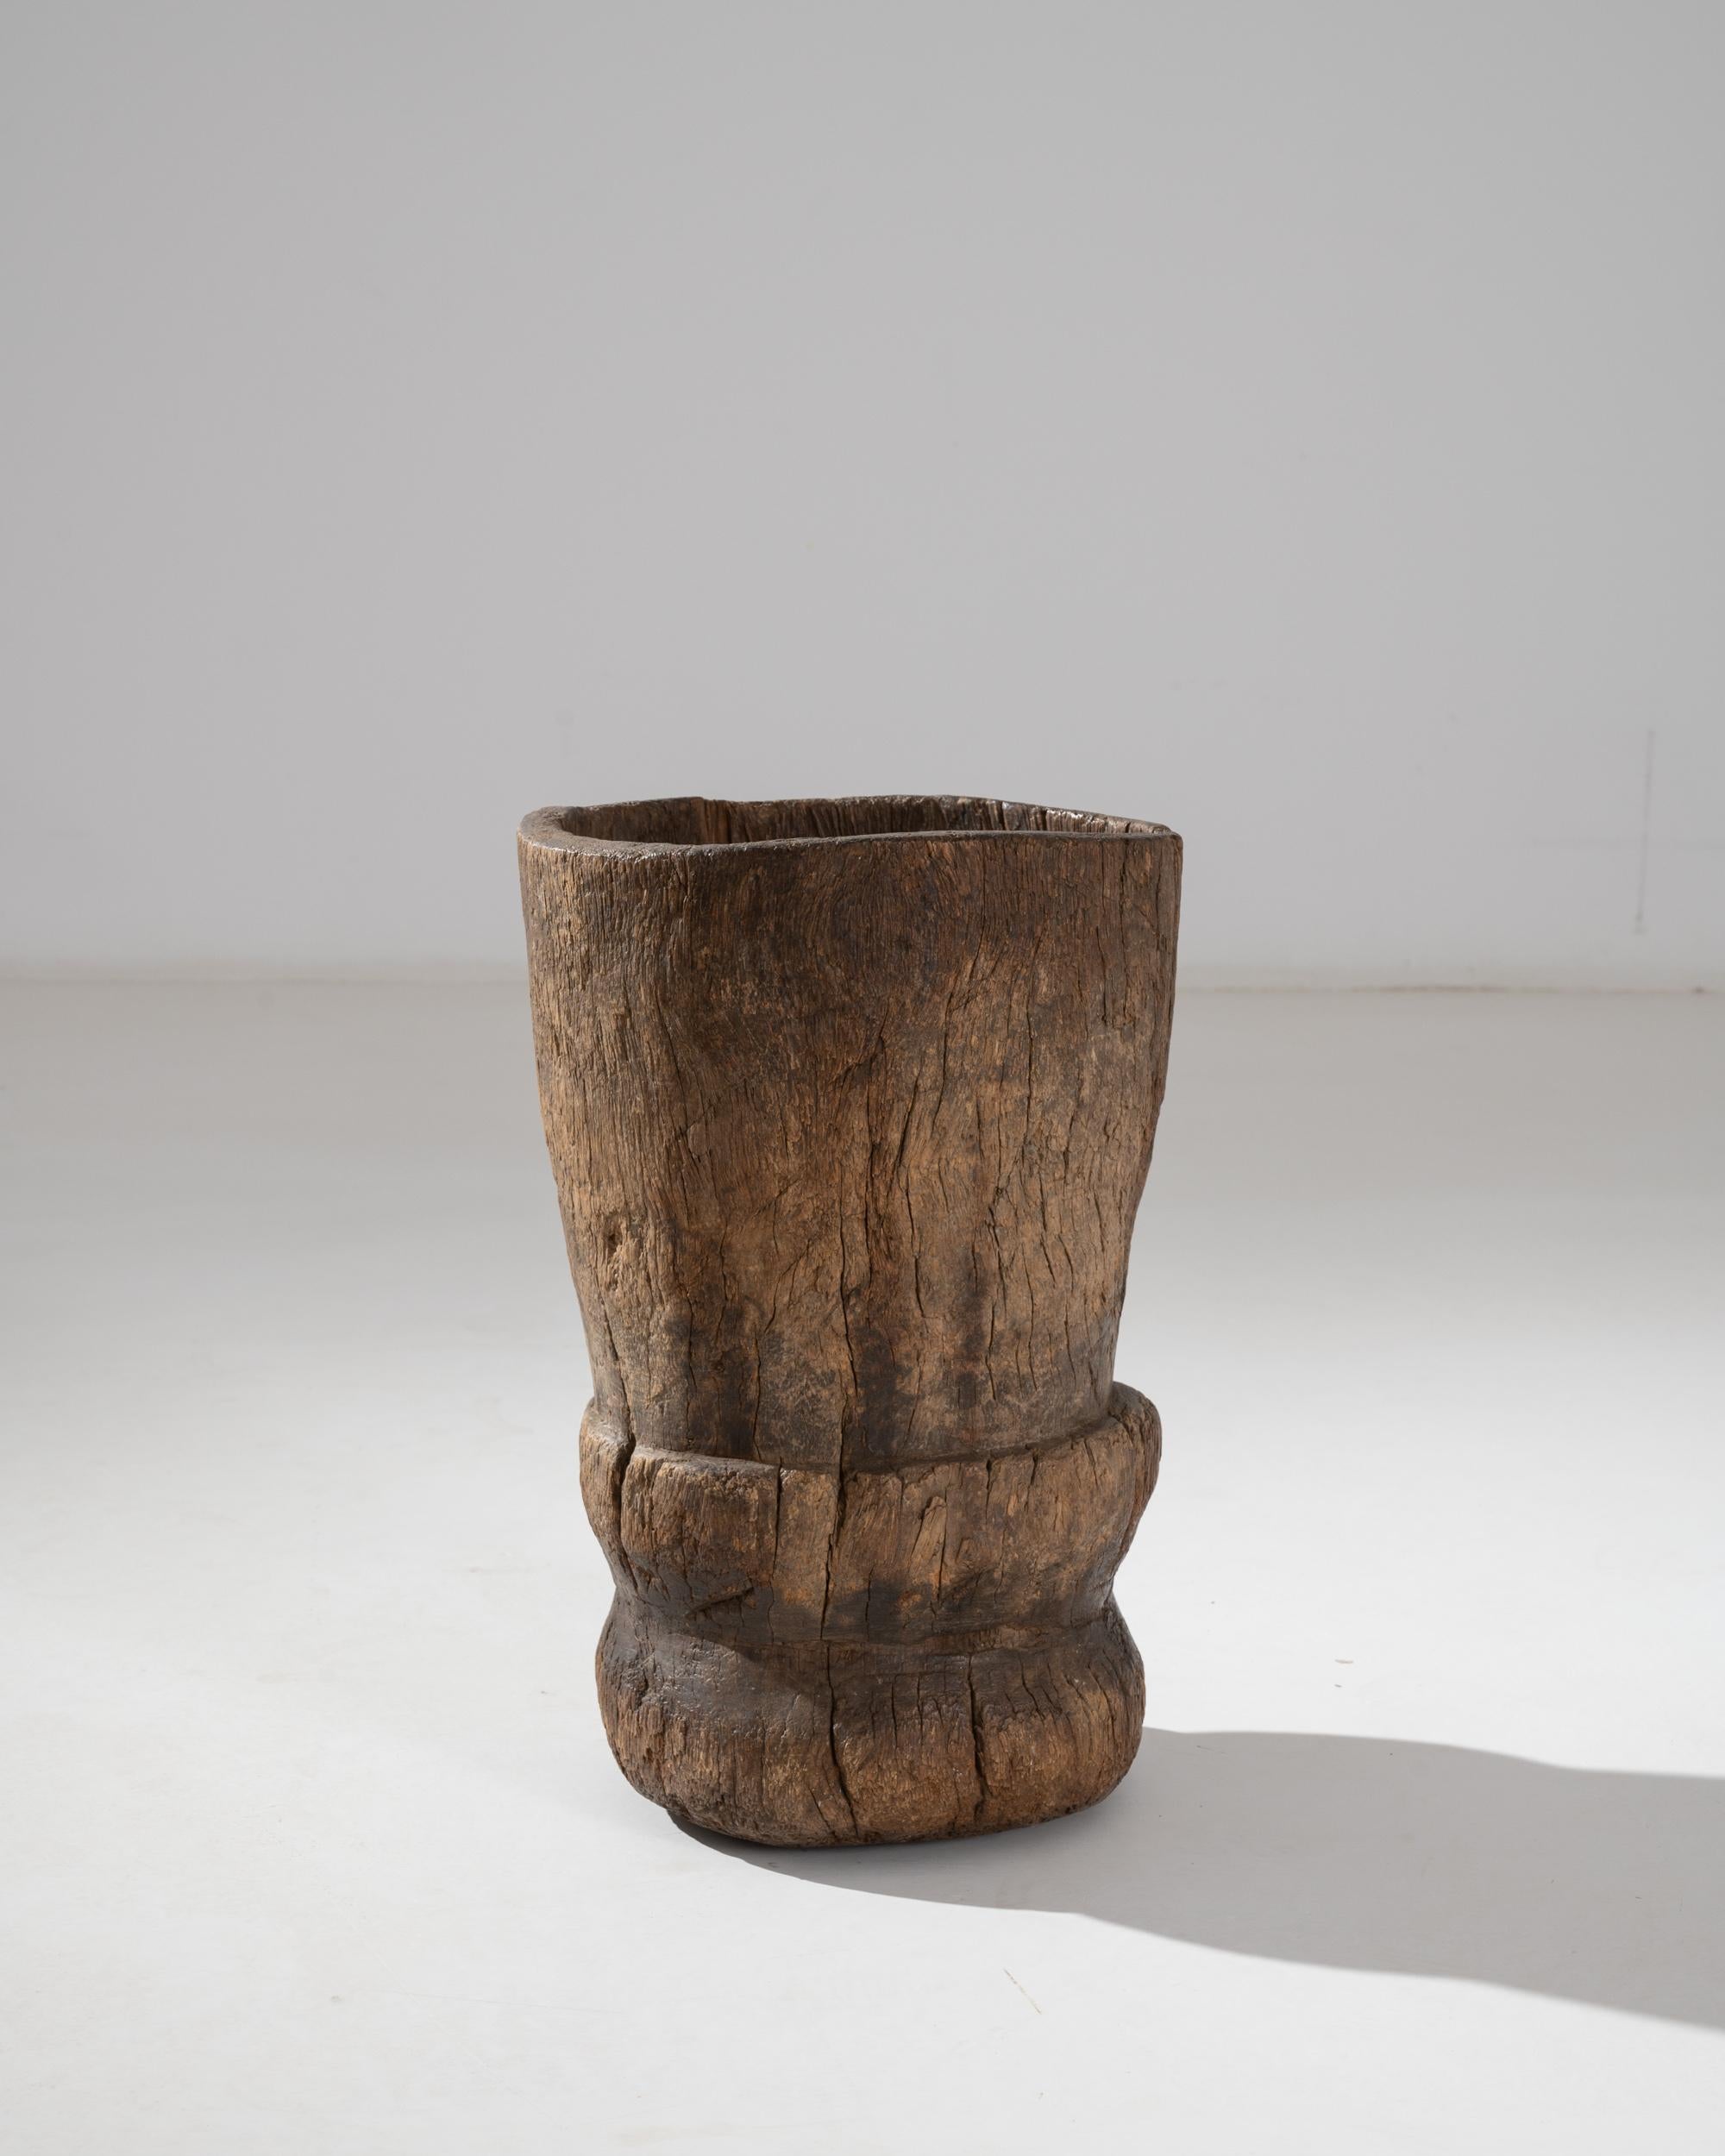 The muscular simplicity and tactile appeal of this antique wooden mortar give it a majestic sculptural quality. Made in Africa in the 1800s, the large size of this piece indicates that it would have been originally used to hull grain. The high-sided